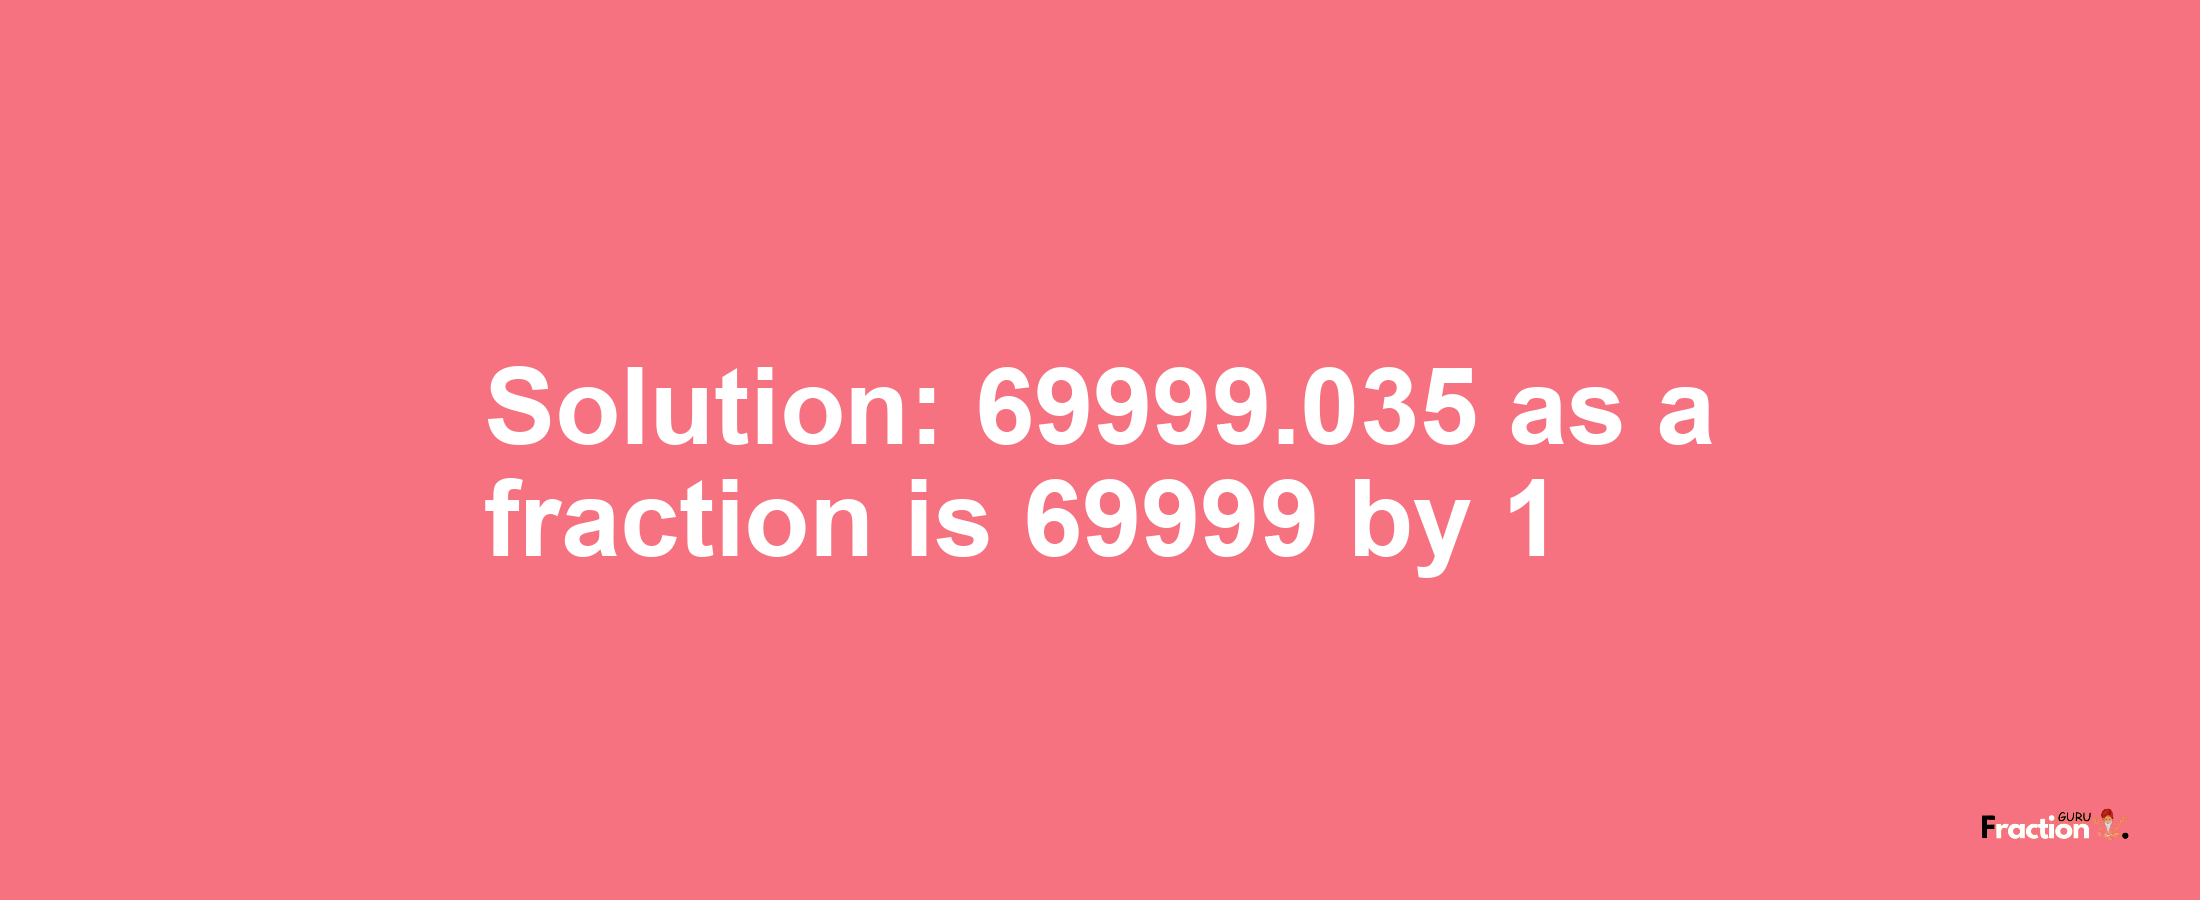 Solution:69999.035 as a fraction is 69999/1